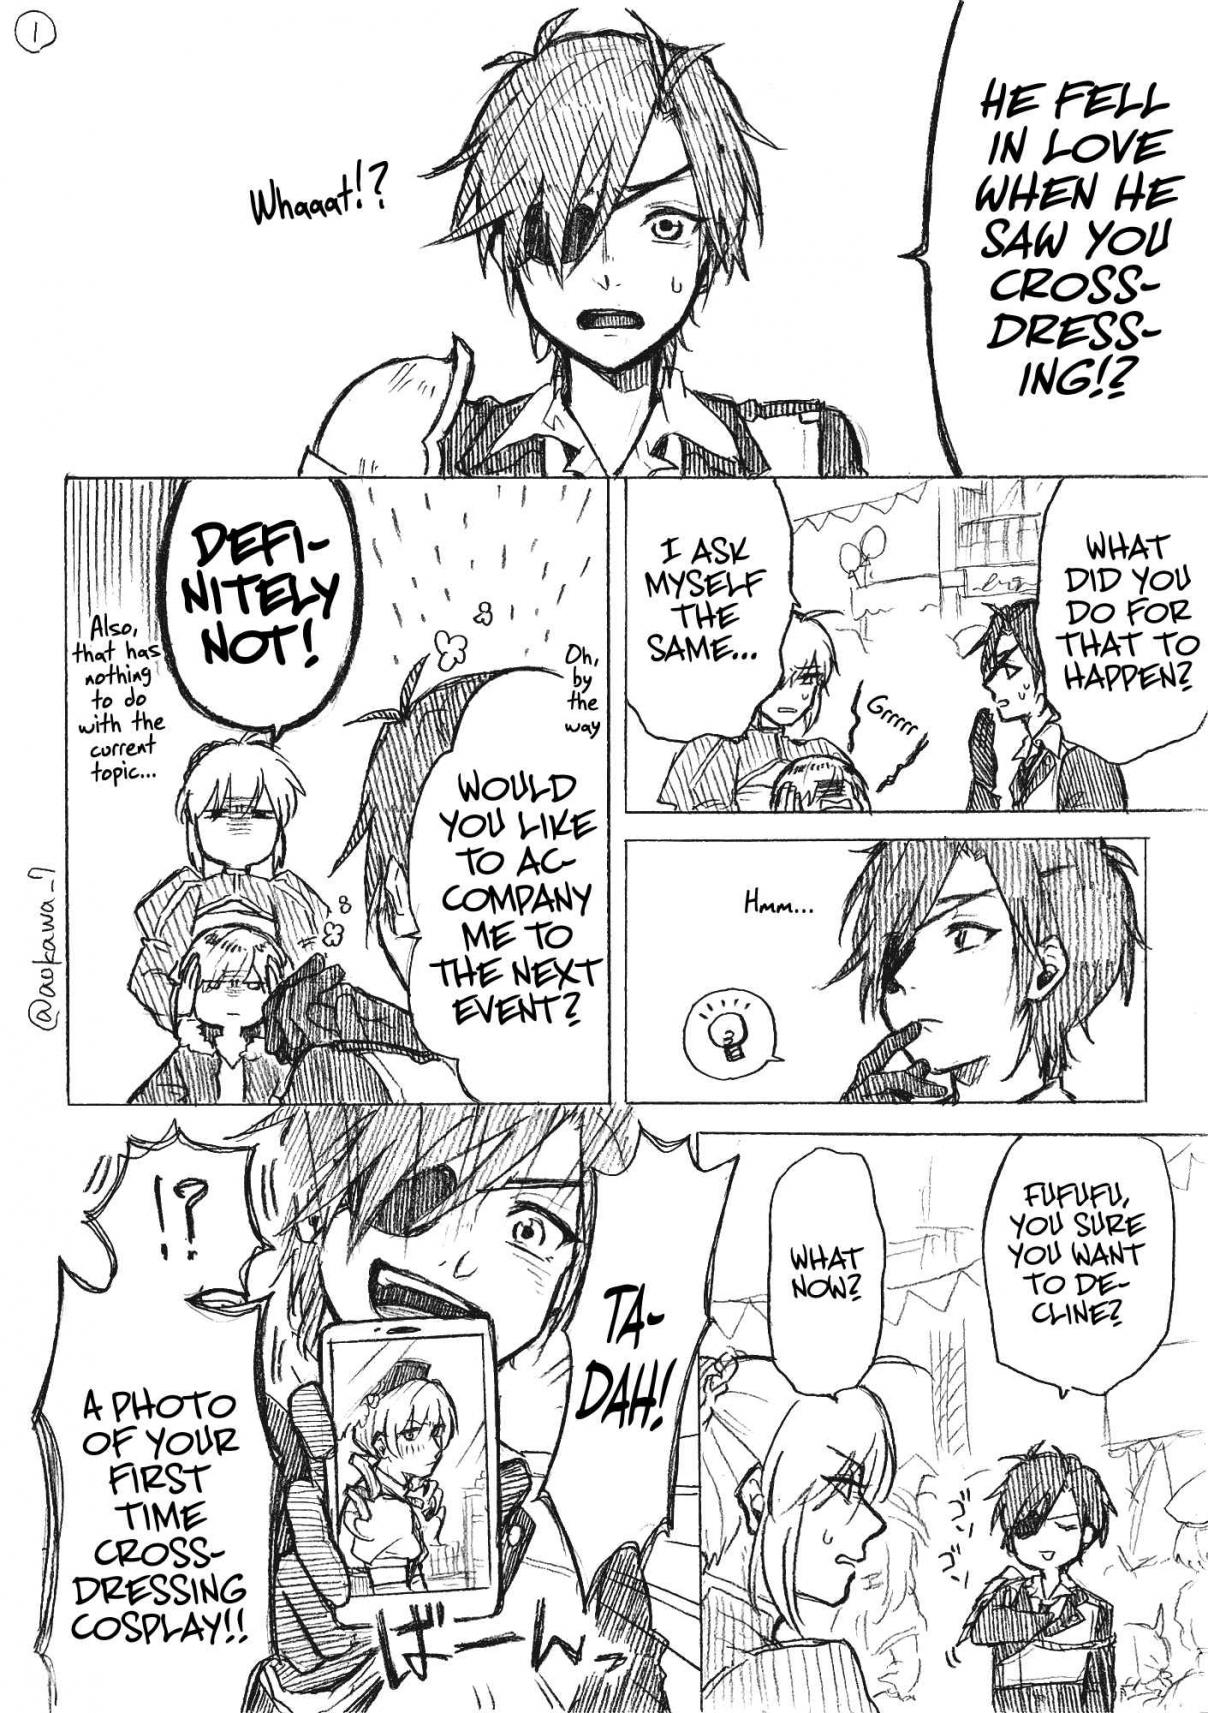 A Crossdressing Cosplayer Gets a Brother Ch. 2.2 Part 5